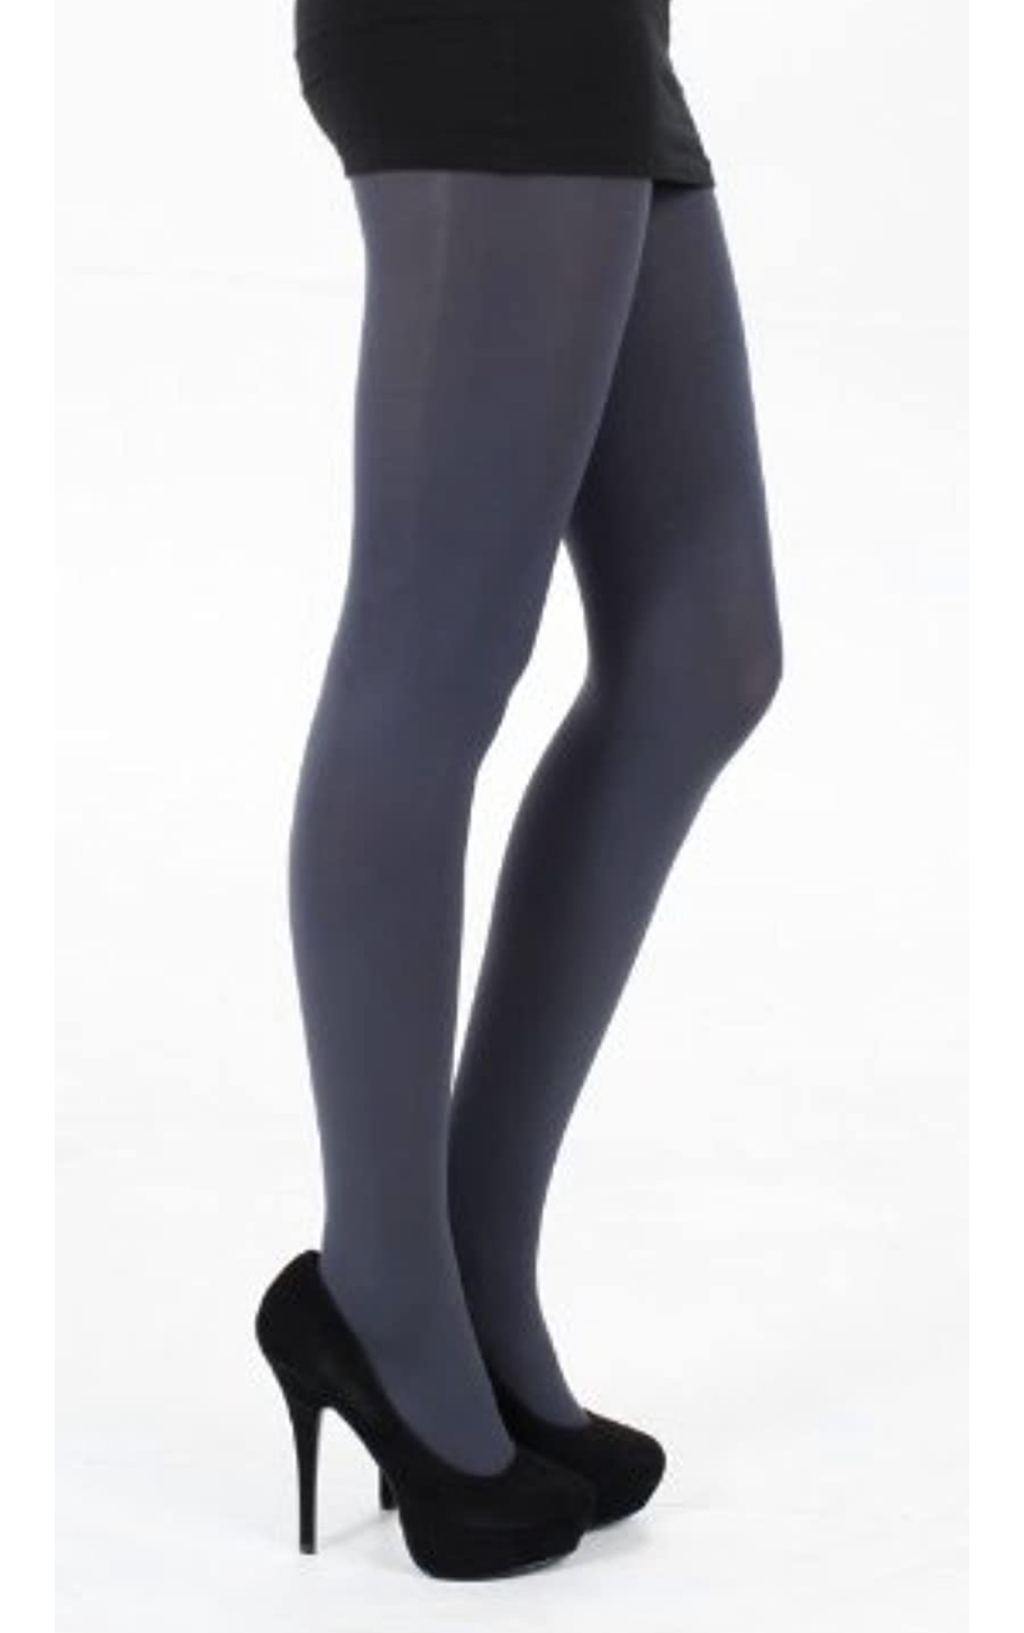 Sparkling look of the day - Fashion Tights